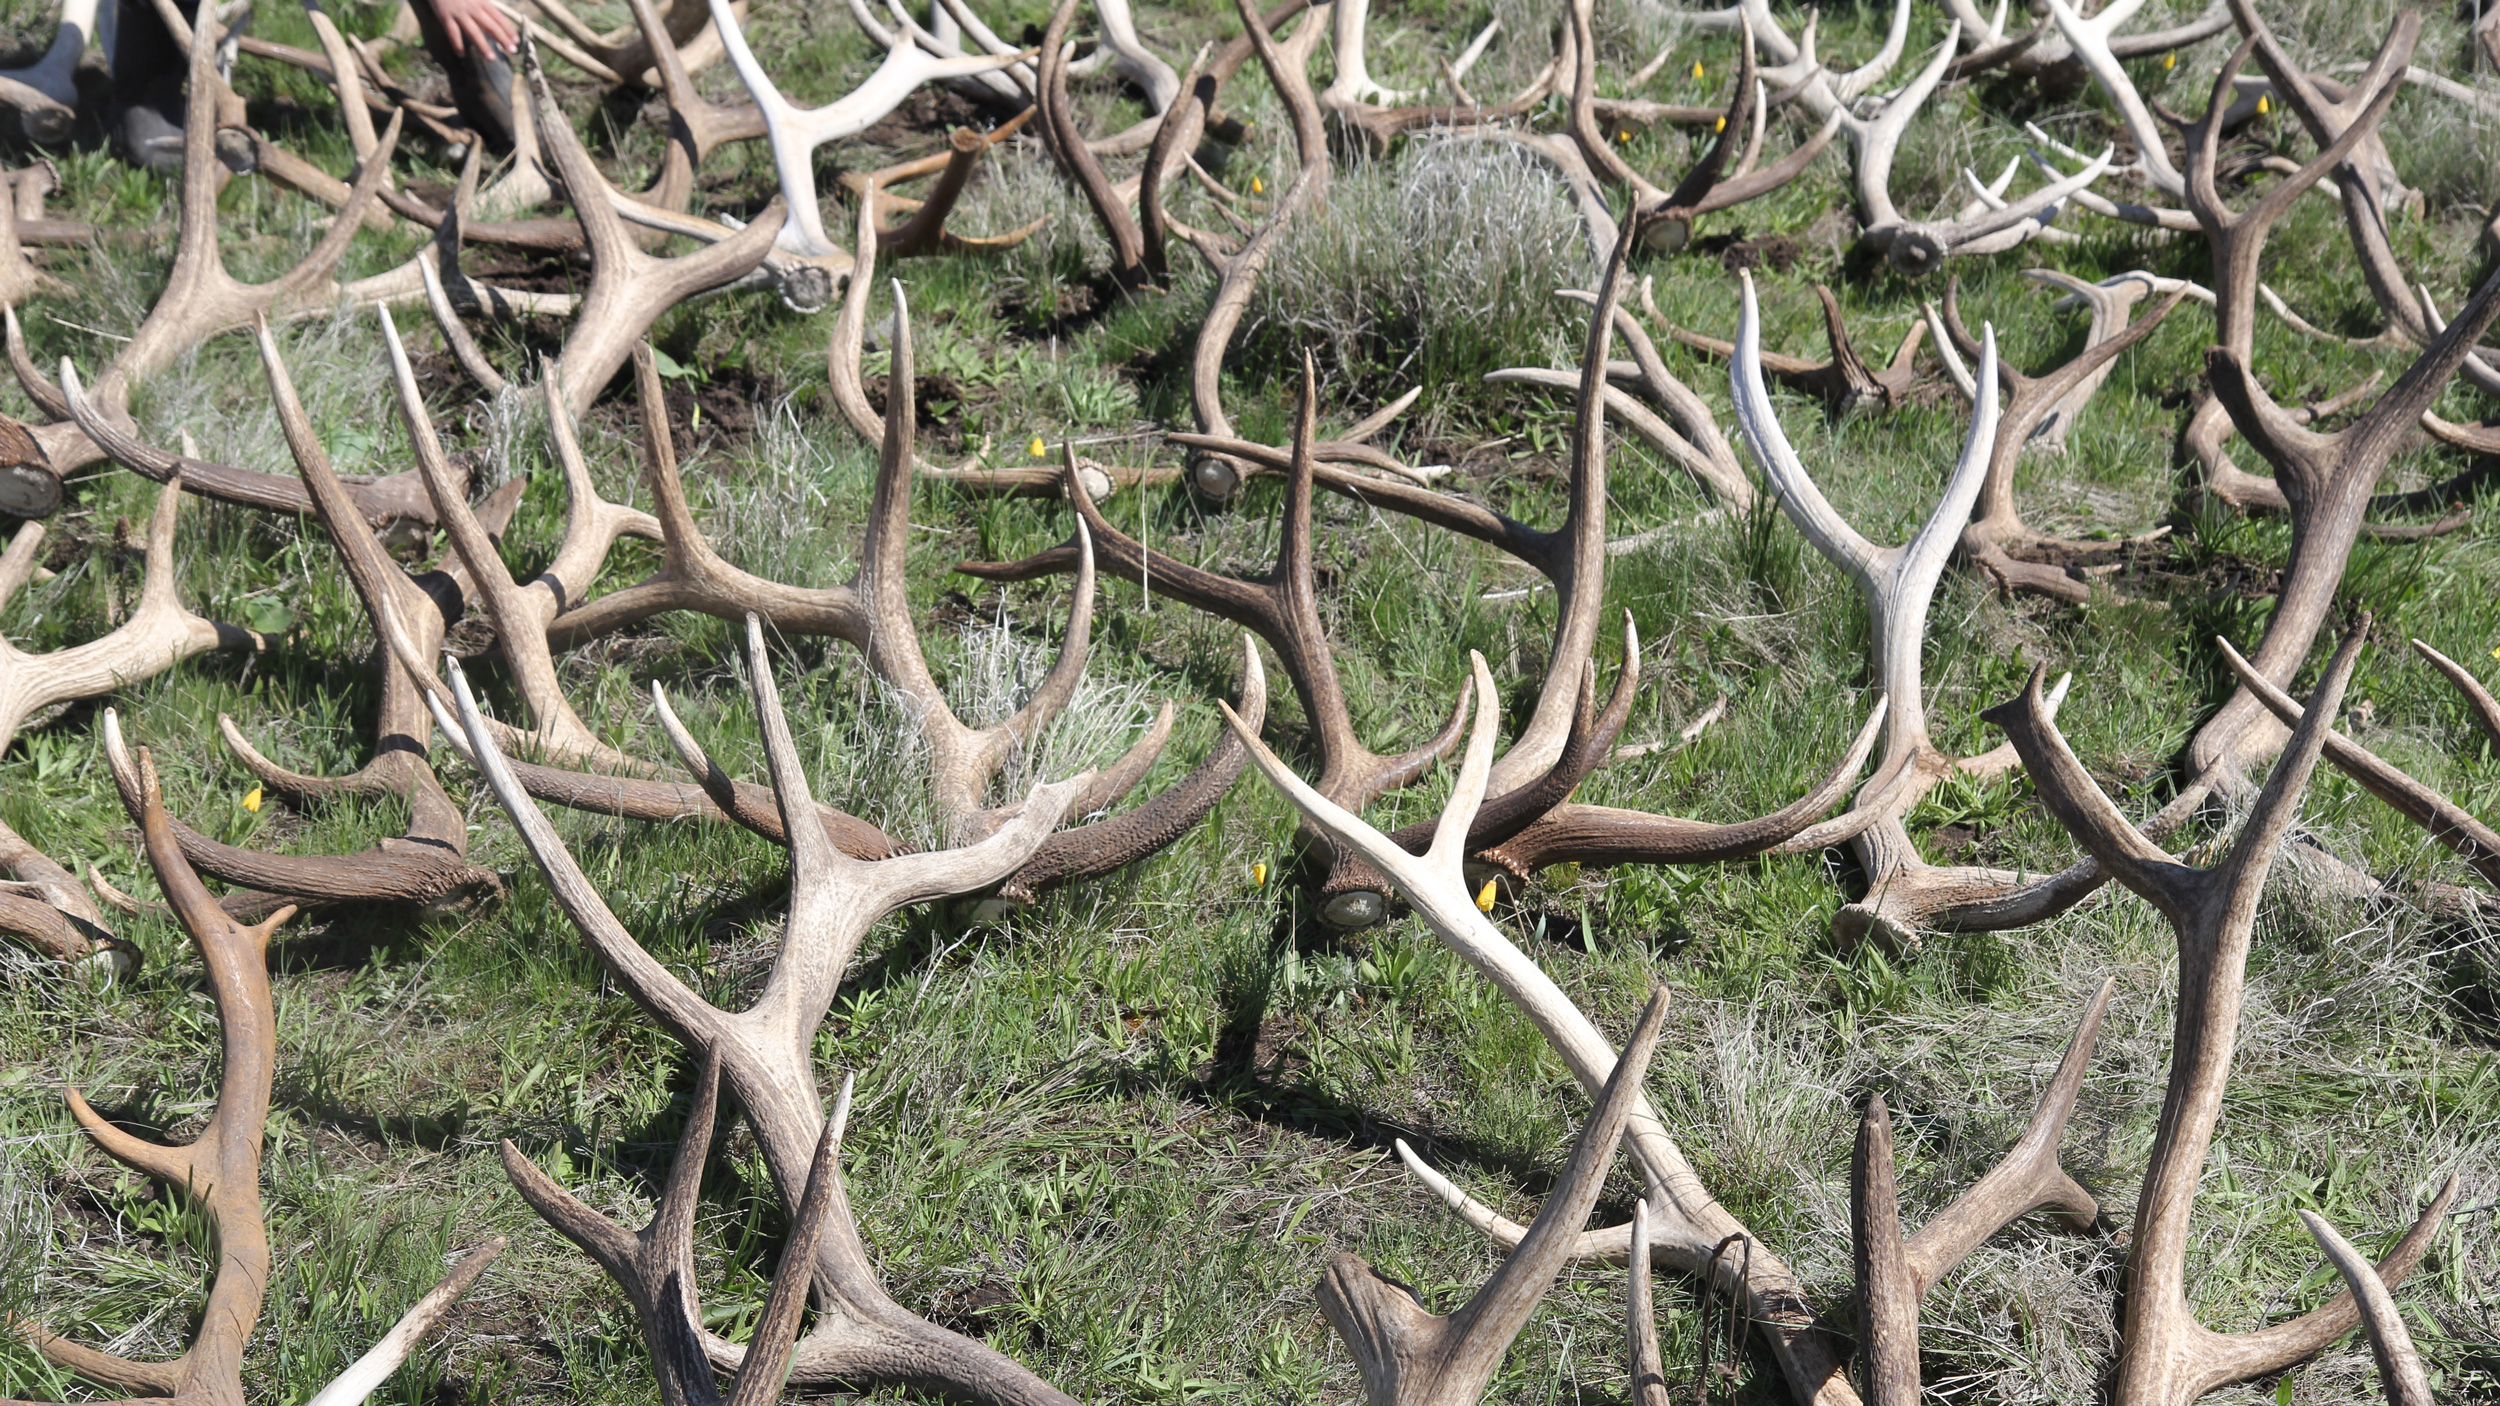 A big day of shed hunting. Photo © The Nature Conservancy (Matt Miller)